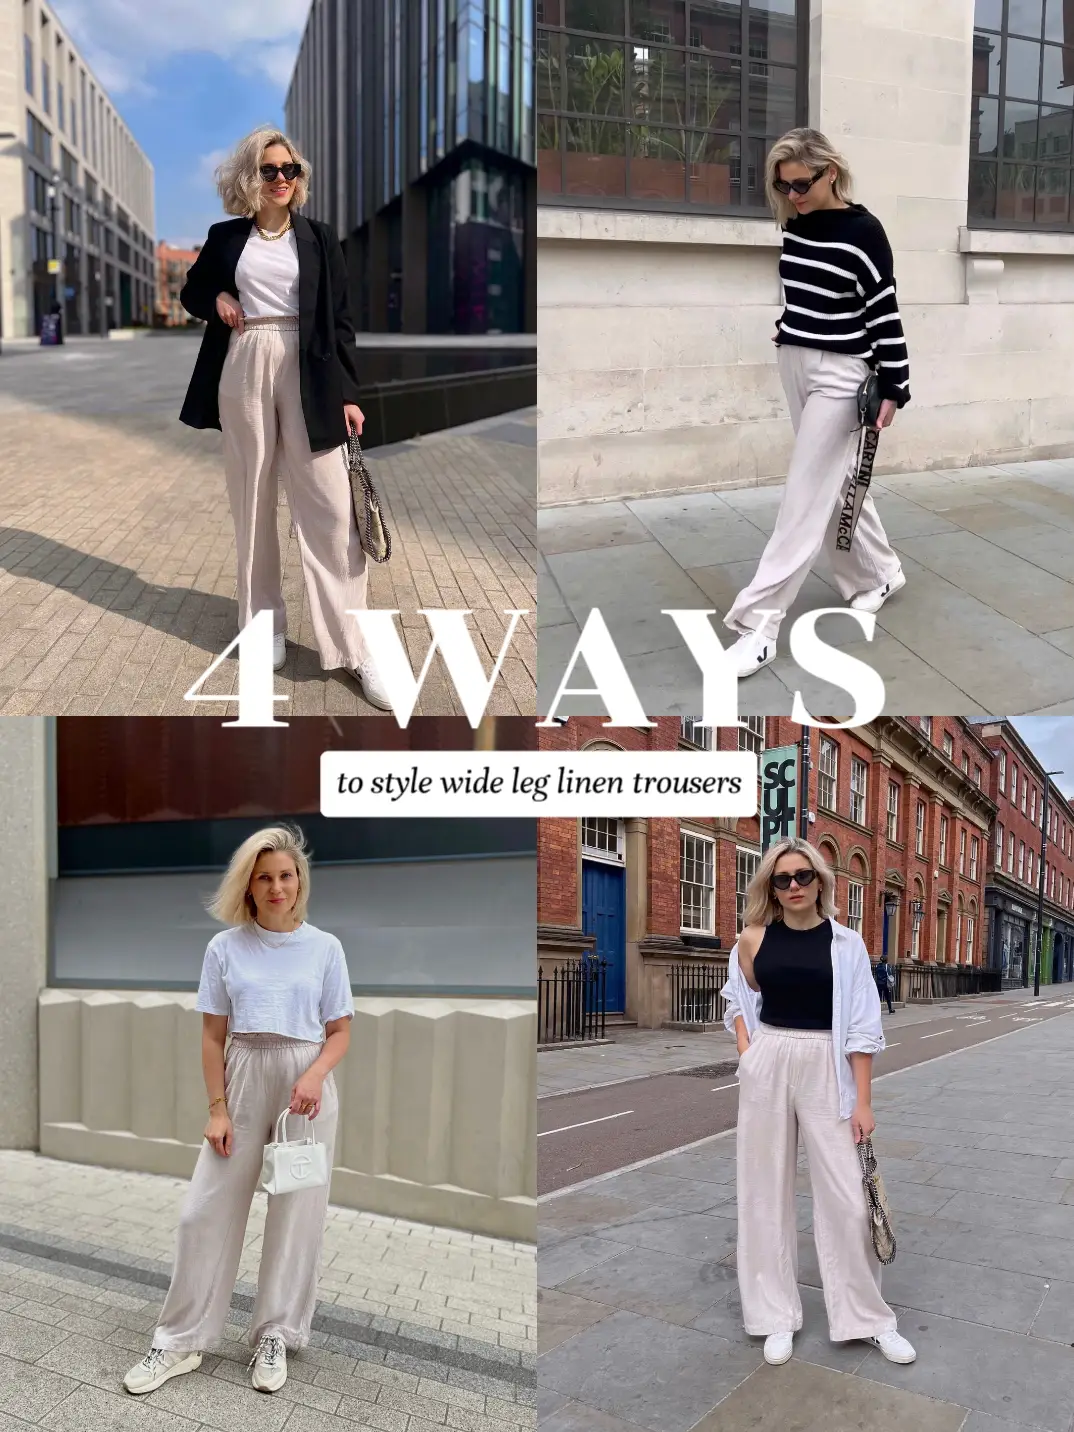 6 Foolproof Ways To Style Your Flowy Linen Pants This Summer